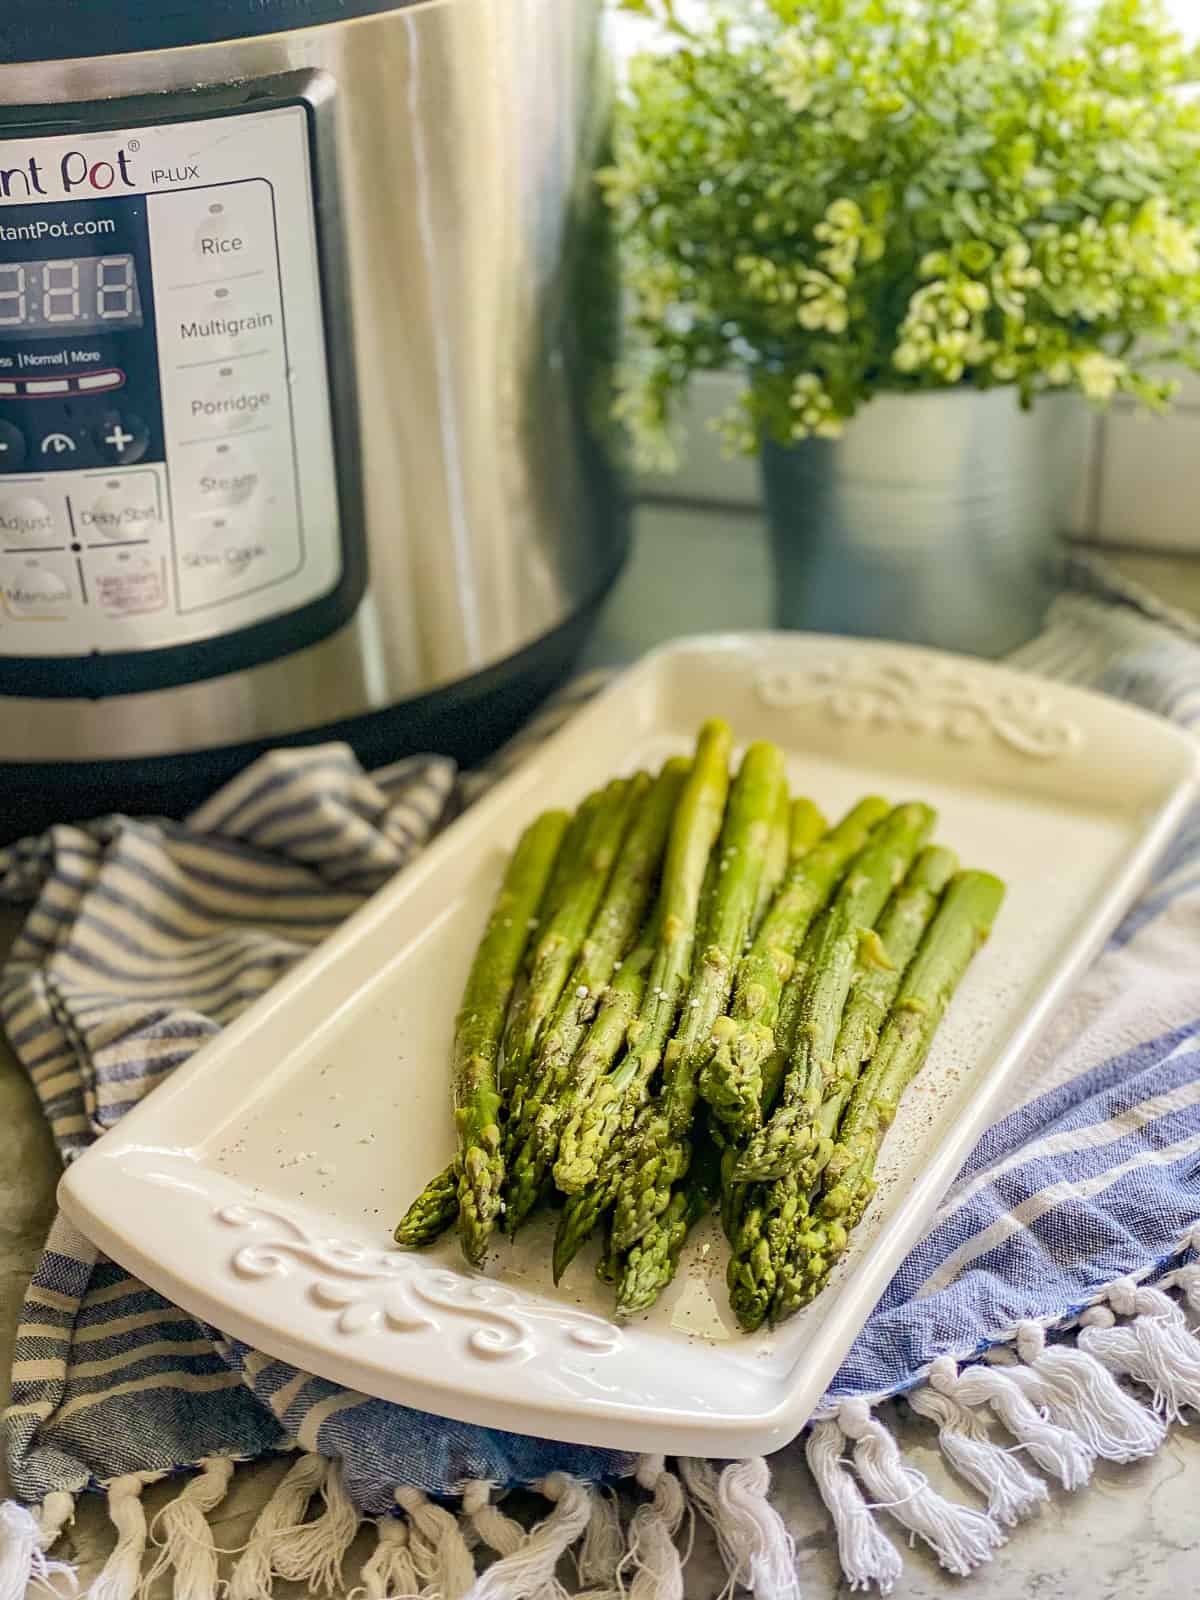 Cooked asparagus resting on a white serving dish that's laying on top of a blue and white striped kitchen towel, with the Instant pot in the background.